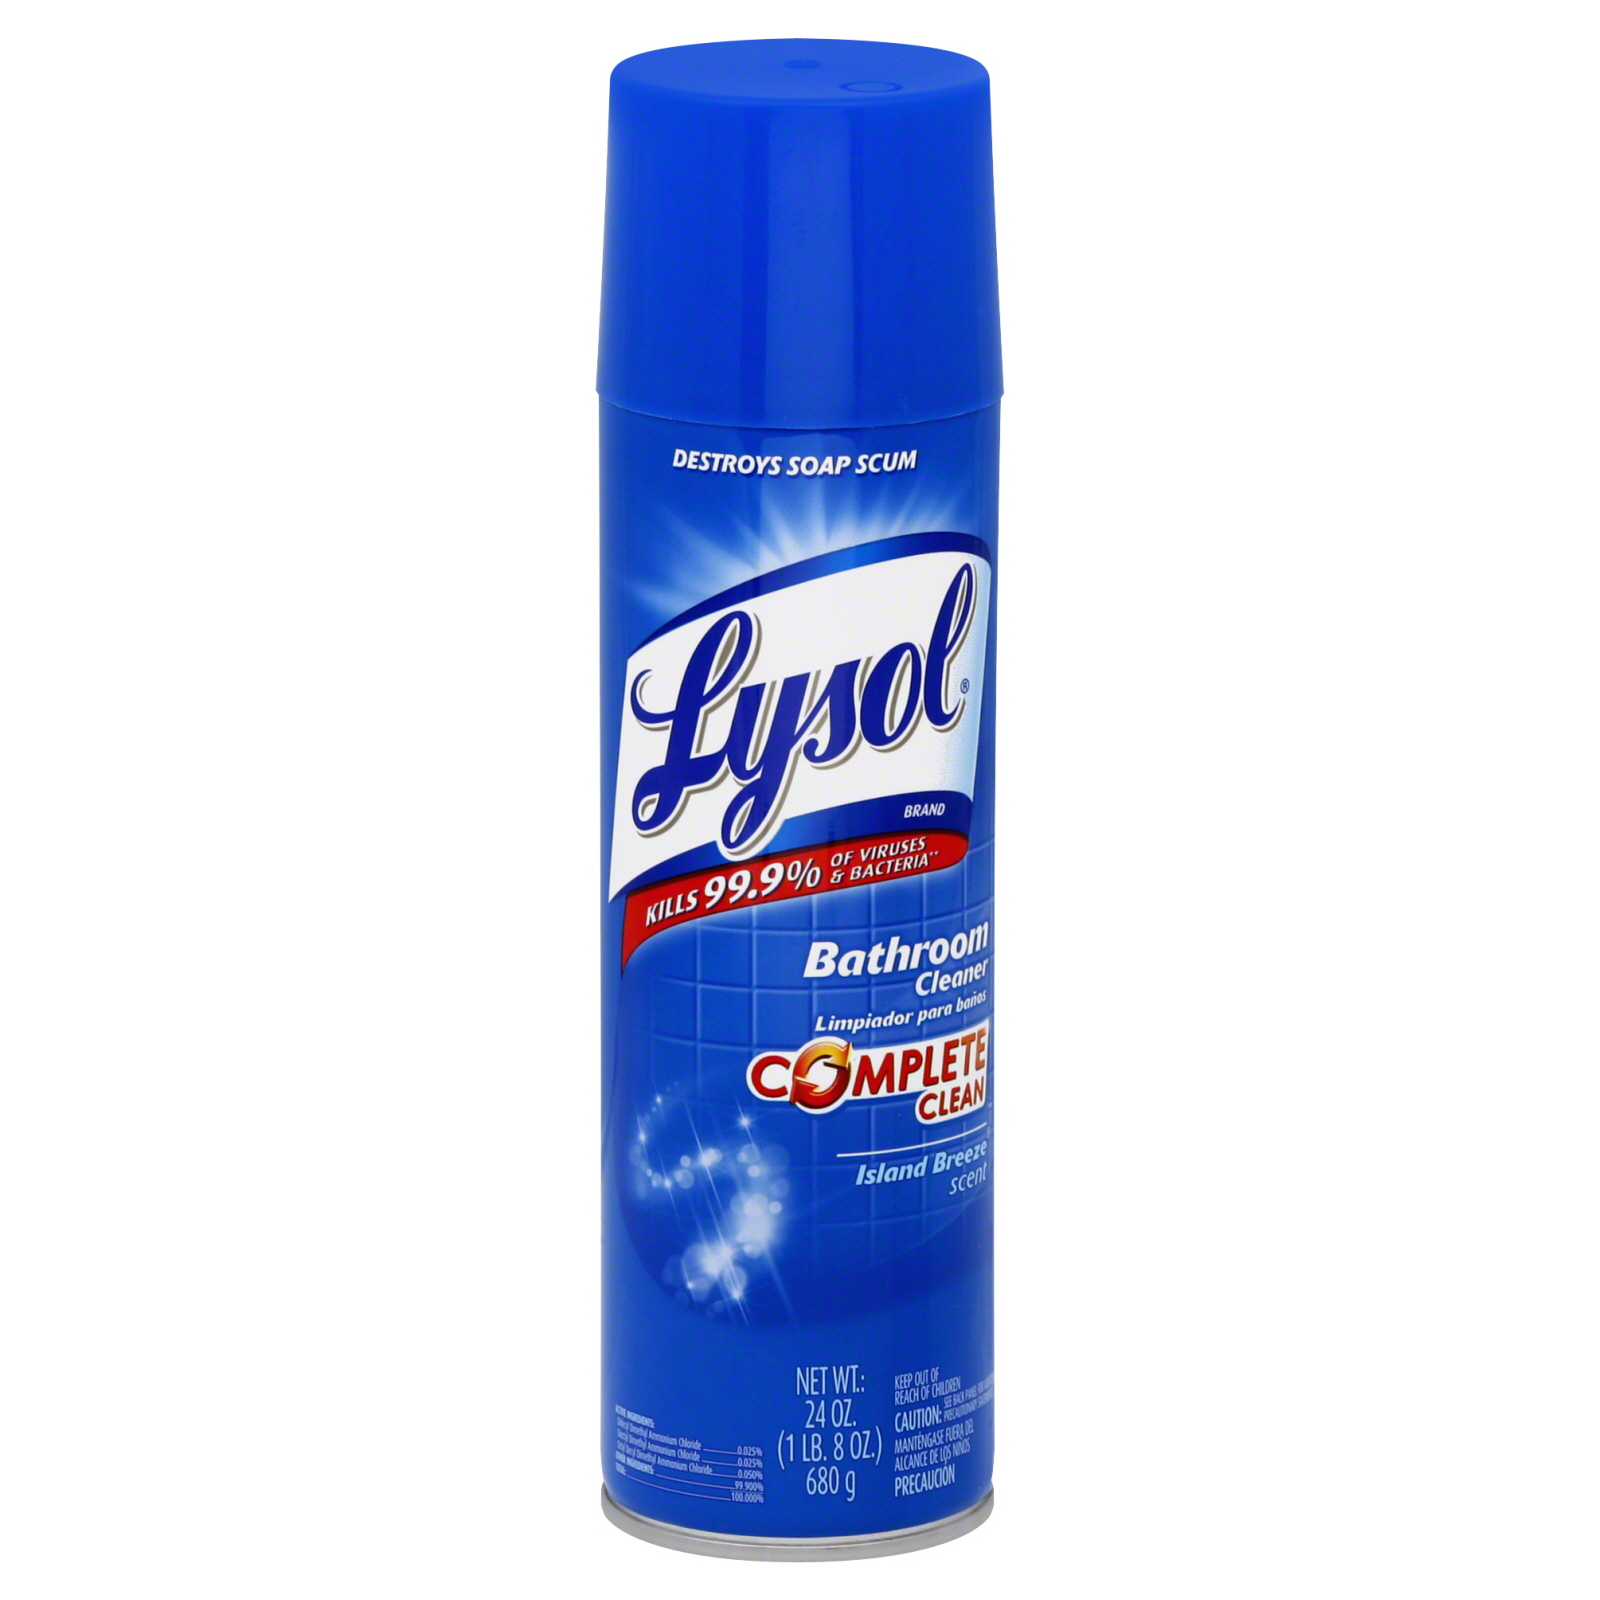 Lysol Complete Clean Bathroom Cleaner, Island Breeze Scent, 32 fl oz (1 qt) 946 ml   Food & Grocery   Cleaning Supplies   Bathroom